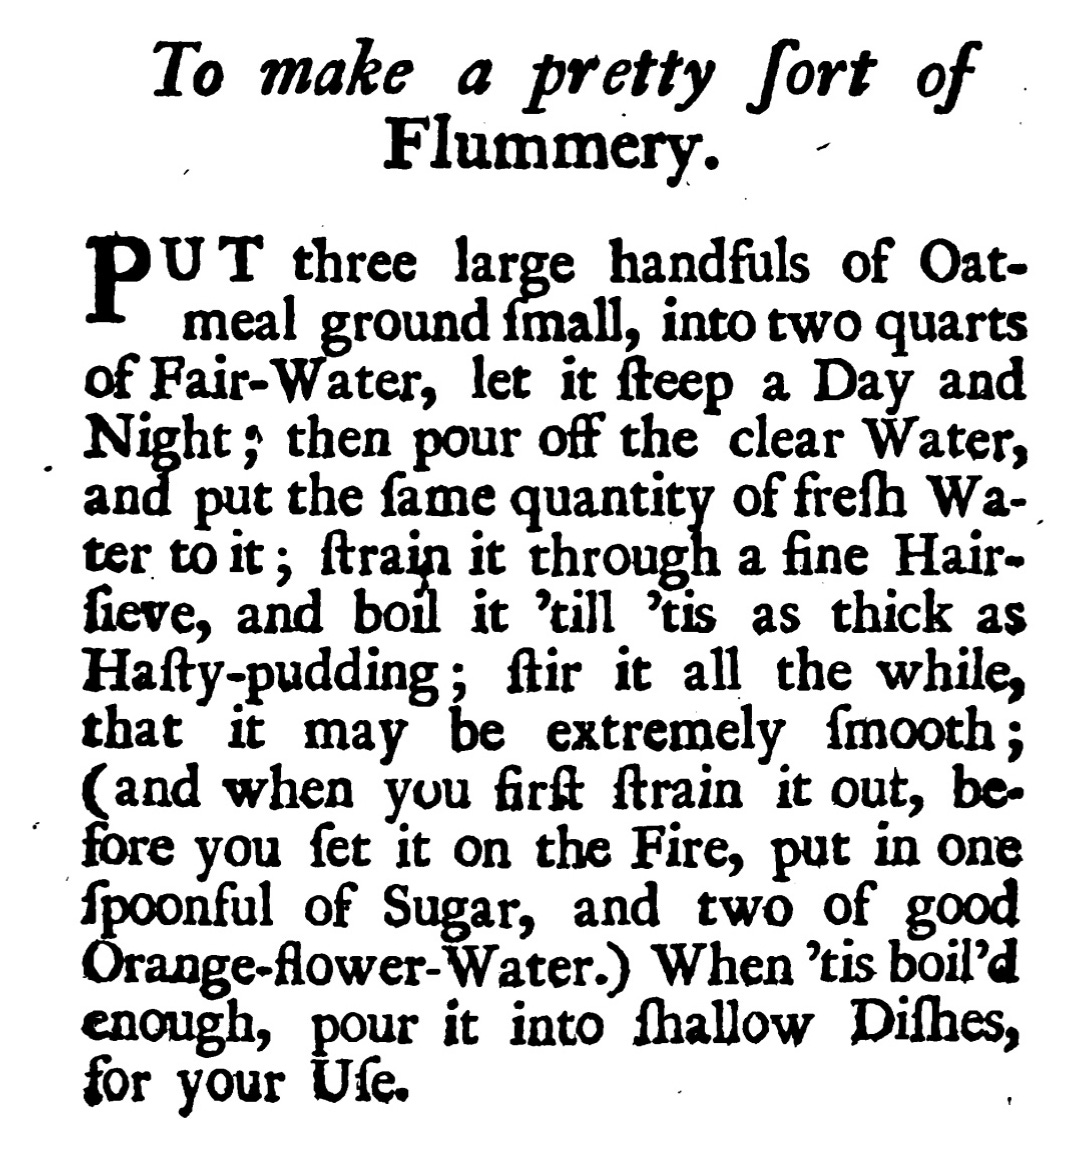 To make a pretty fort of Flummery. PUT three large handfuls of Oatmeal ground (mall, into two quarts of Fair-Water, let it fteep a Day and . Night; then pour off the clear Water, and put the fame quantity of frefh Water to it; frain it through a fine Hair-fieve, and boil it rill is as thick as Hafty-pudding; fir it all the while, that extremely. {mooth; (and when you firft frain it out, be. fore you fet it on the Fire, put in one Spoonful of Sugar, and two of good Orange-flower-Water.) When 'tis boil'd enough, pour it into fallow Dilhes, for your lfe.